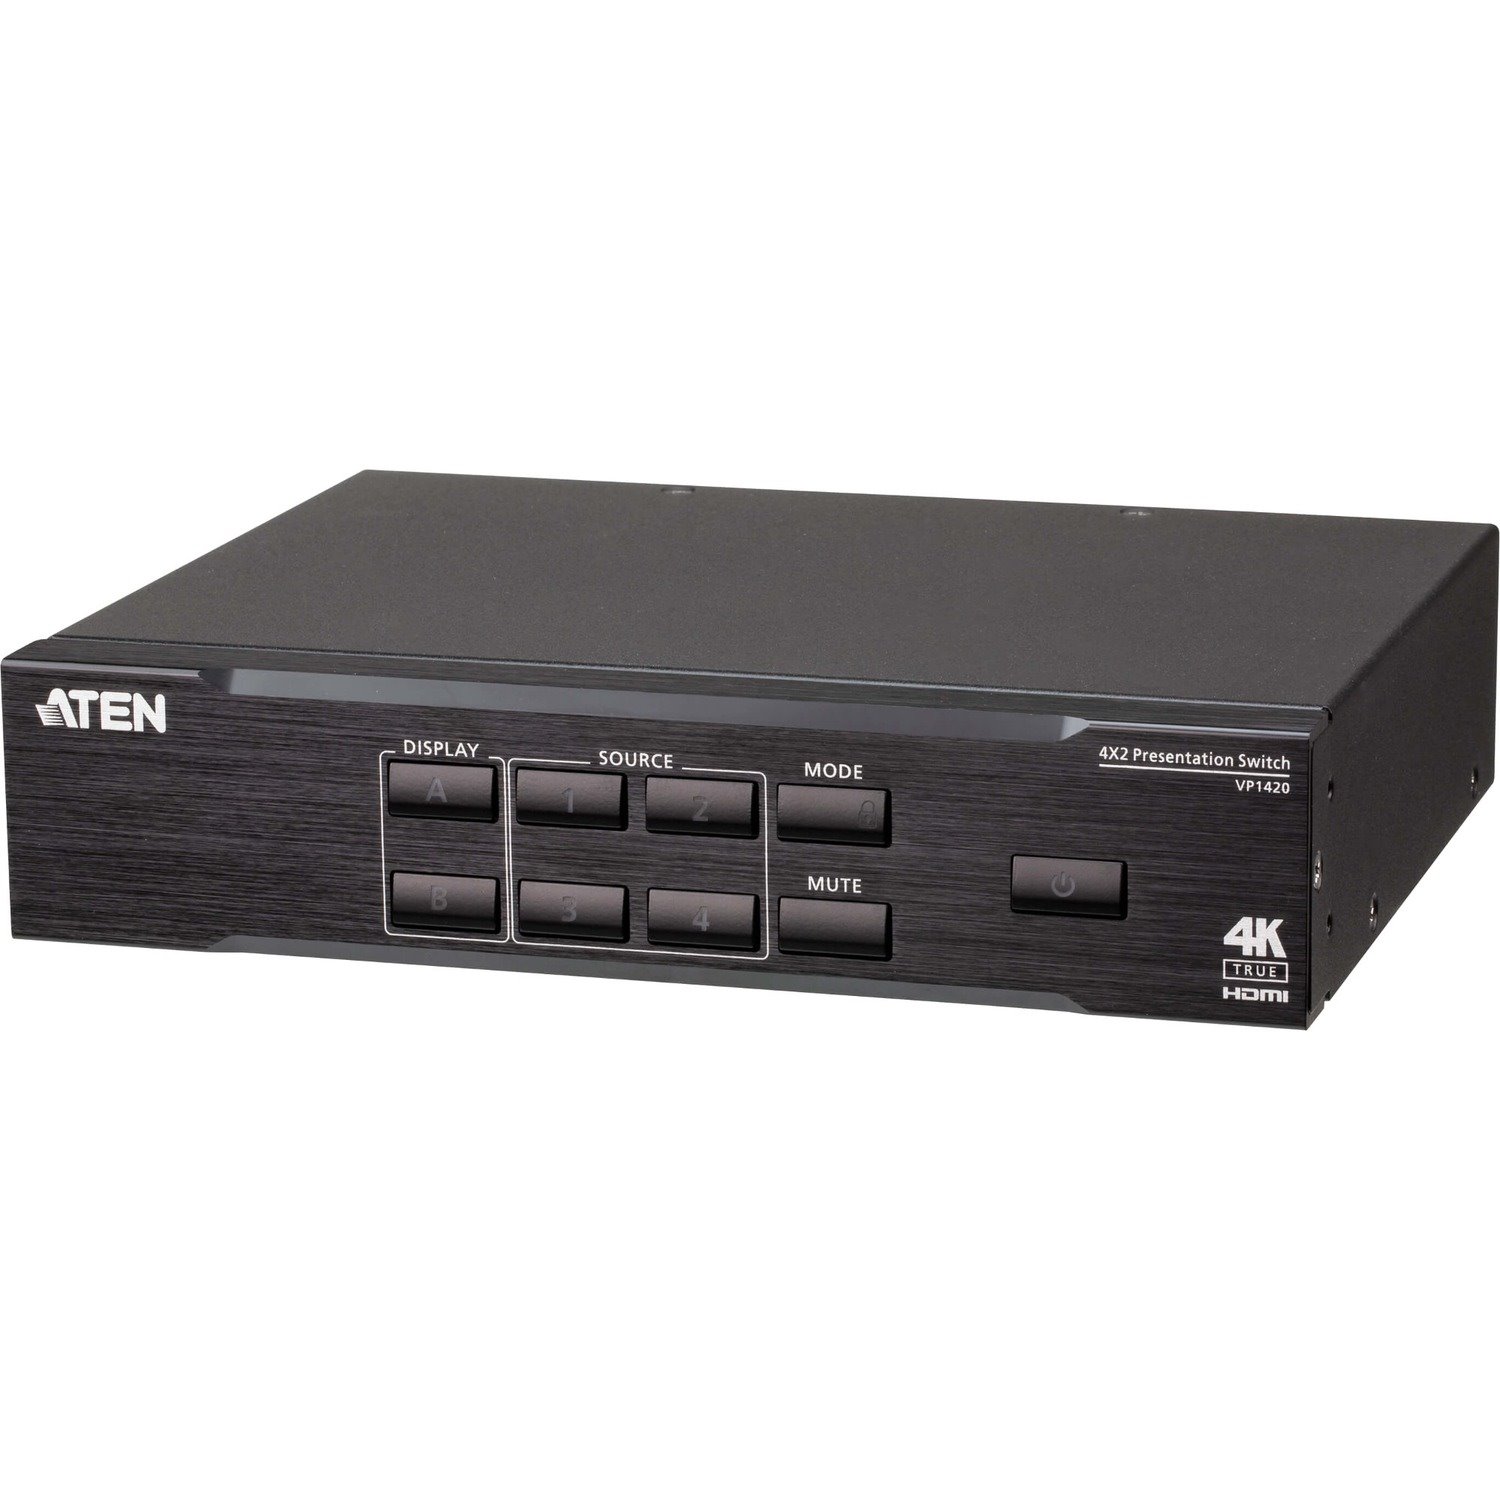 ATEN VP1420 Video Switchbox - Cable